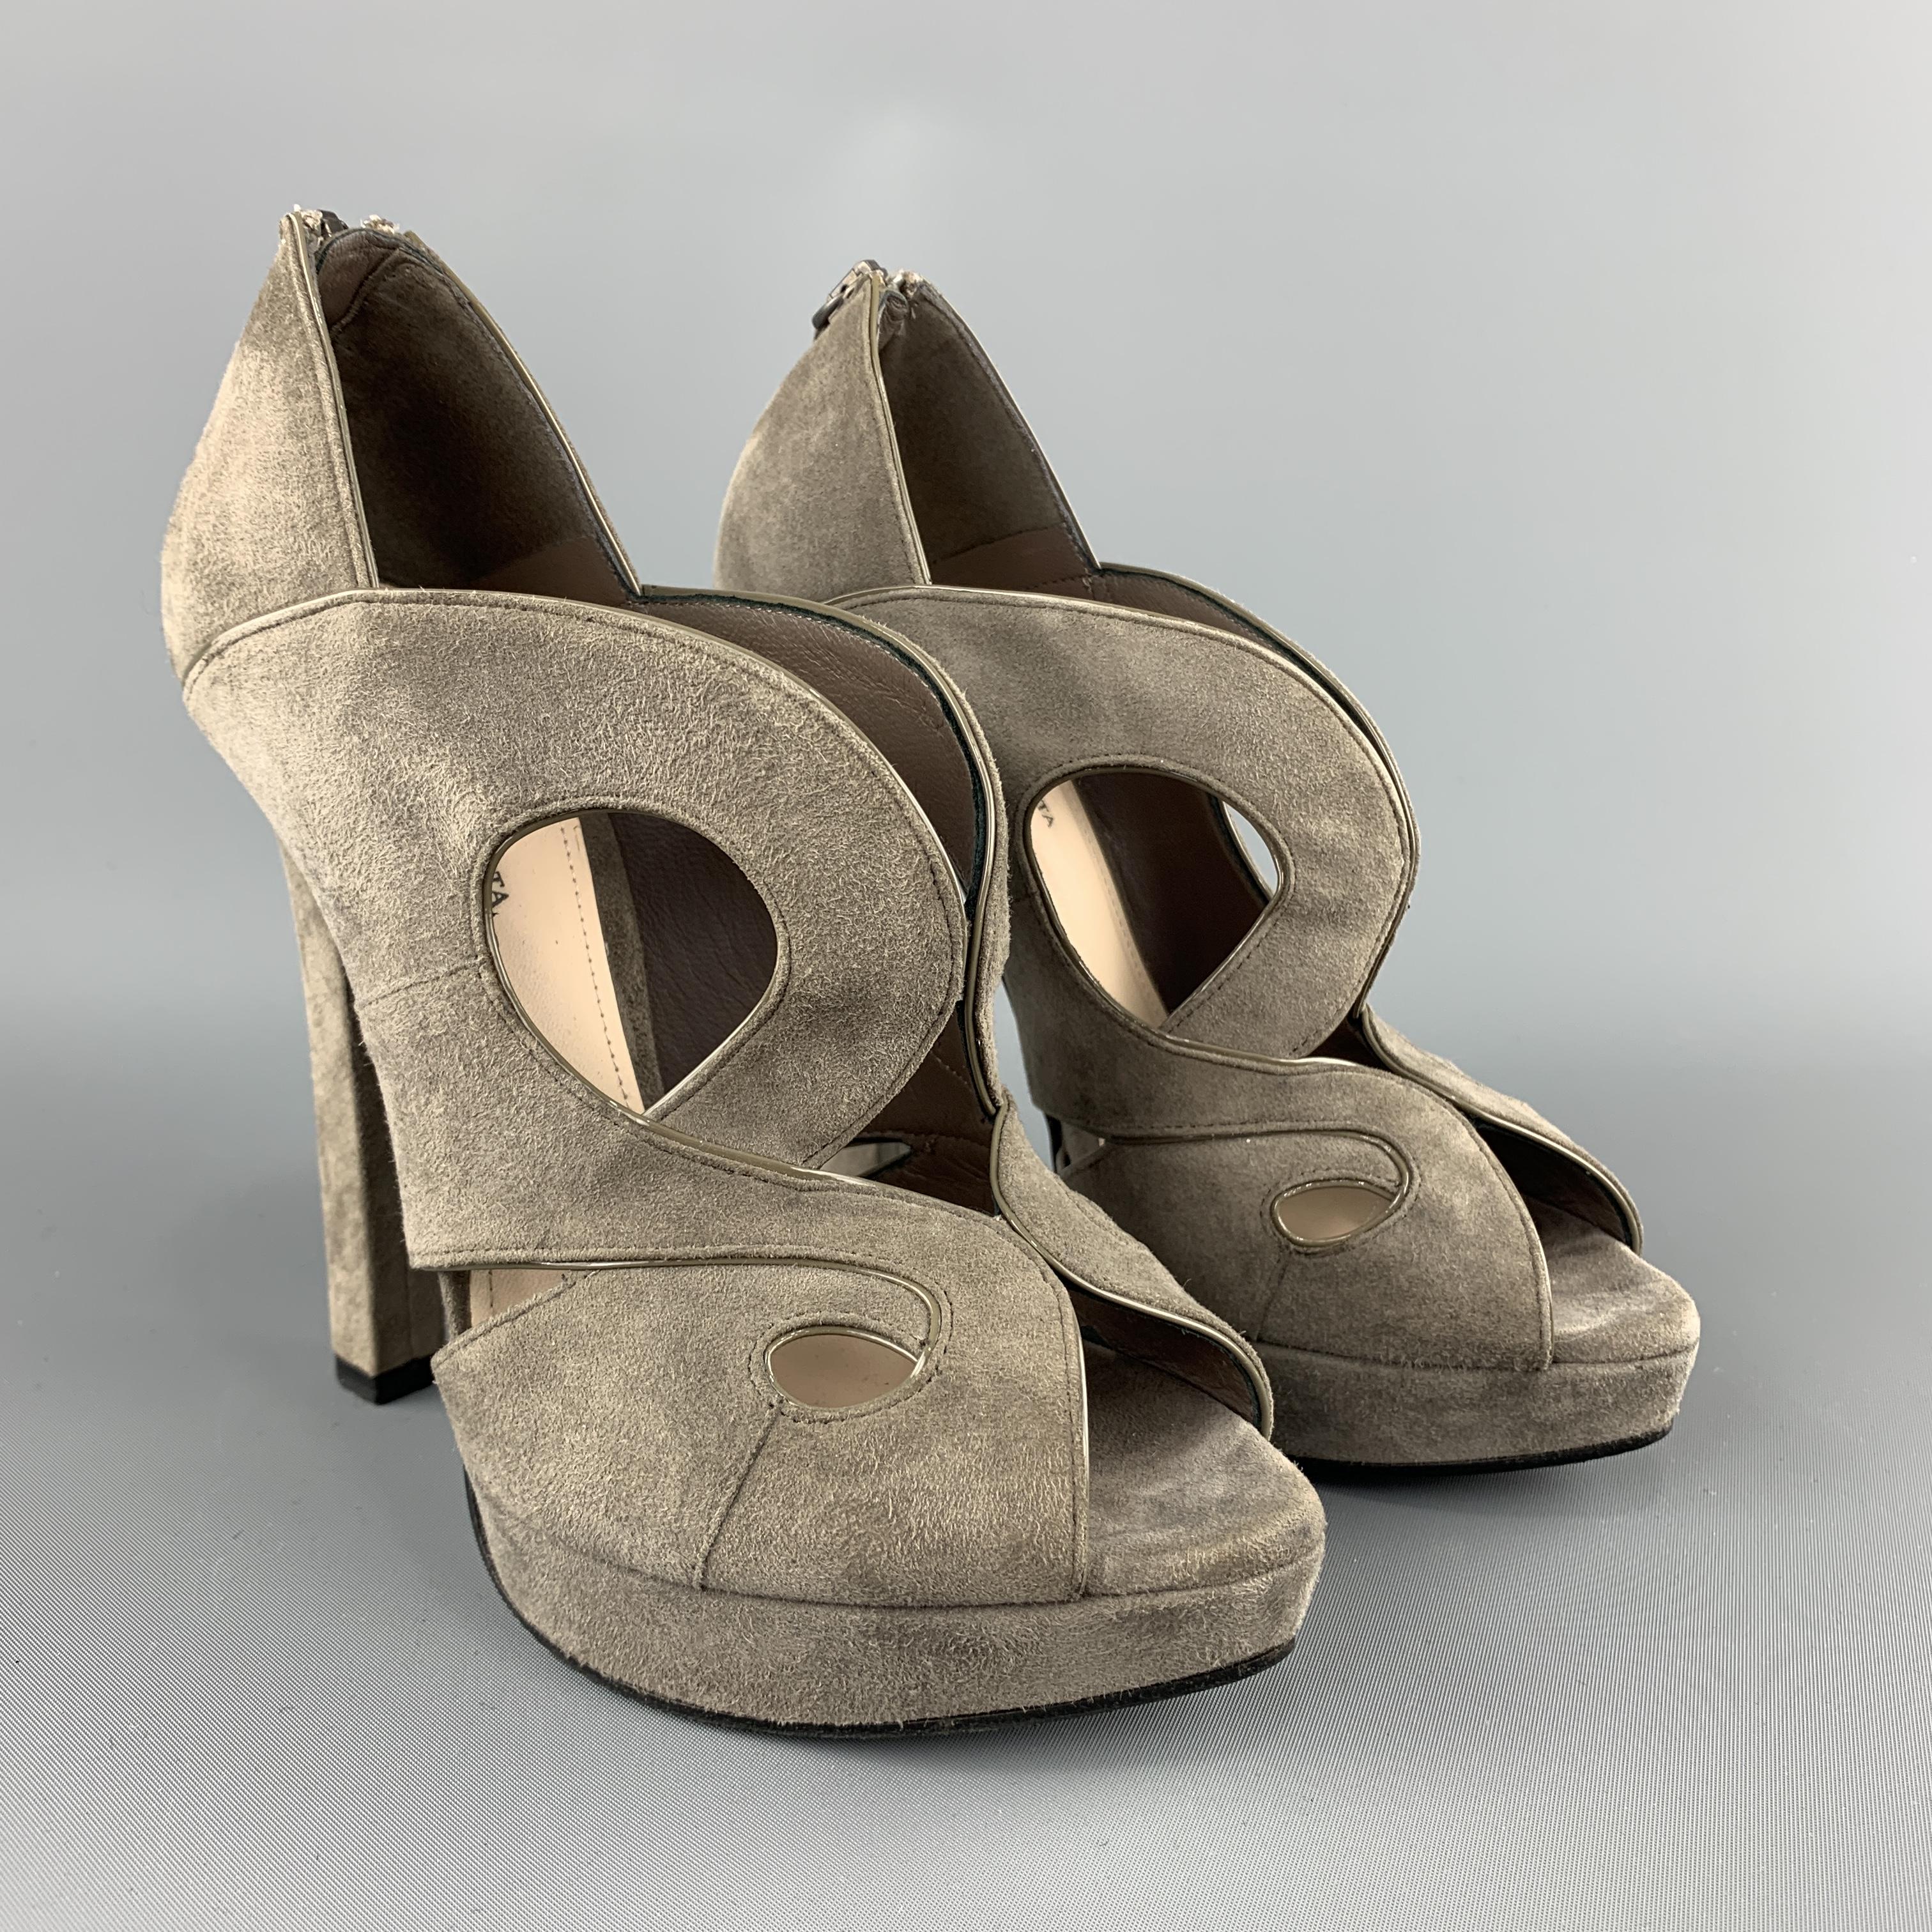 BOTTEGA VENETA sandals come in taupe gray suede with a covered heel, cutouts, peep toe, and patent leather piping. Made in Italy.
 
Very Good Pre-Owned Condition.
Marked: IT 37
 
Measurements:
 
Heel: 5 in.
Platform: 0.75 in.